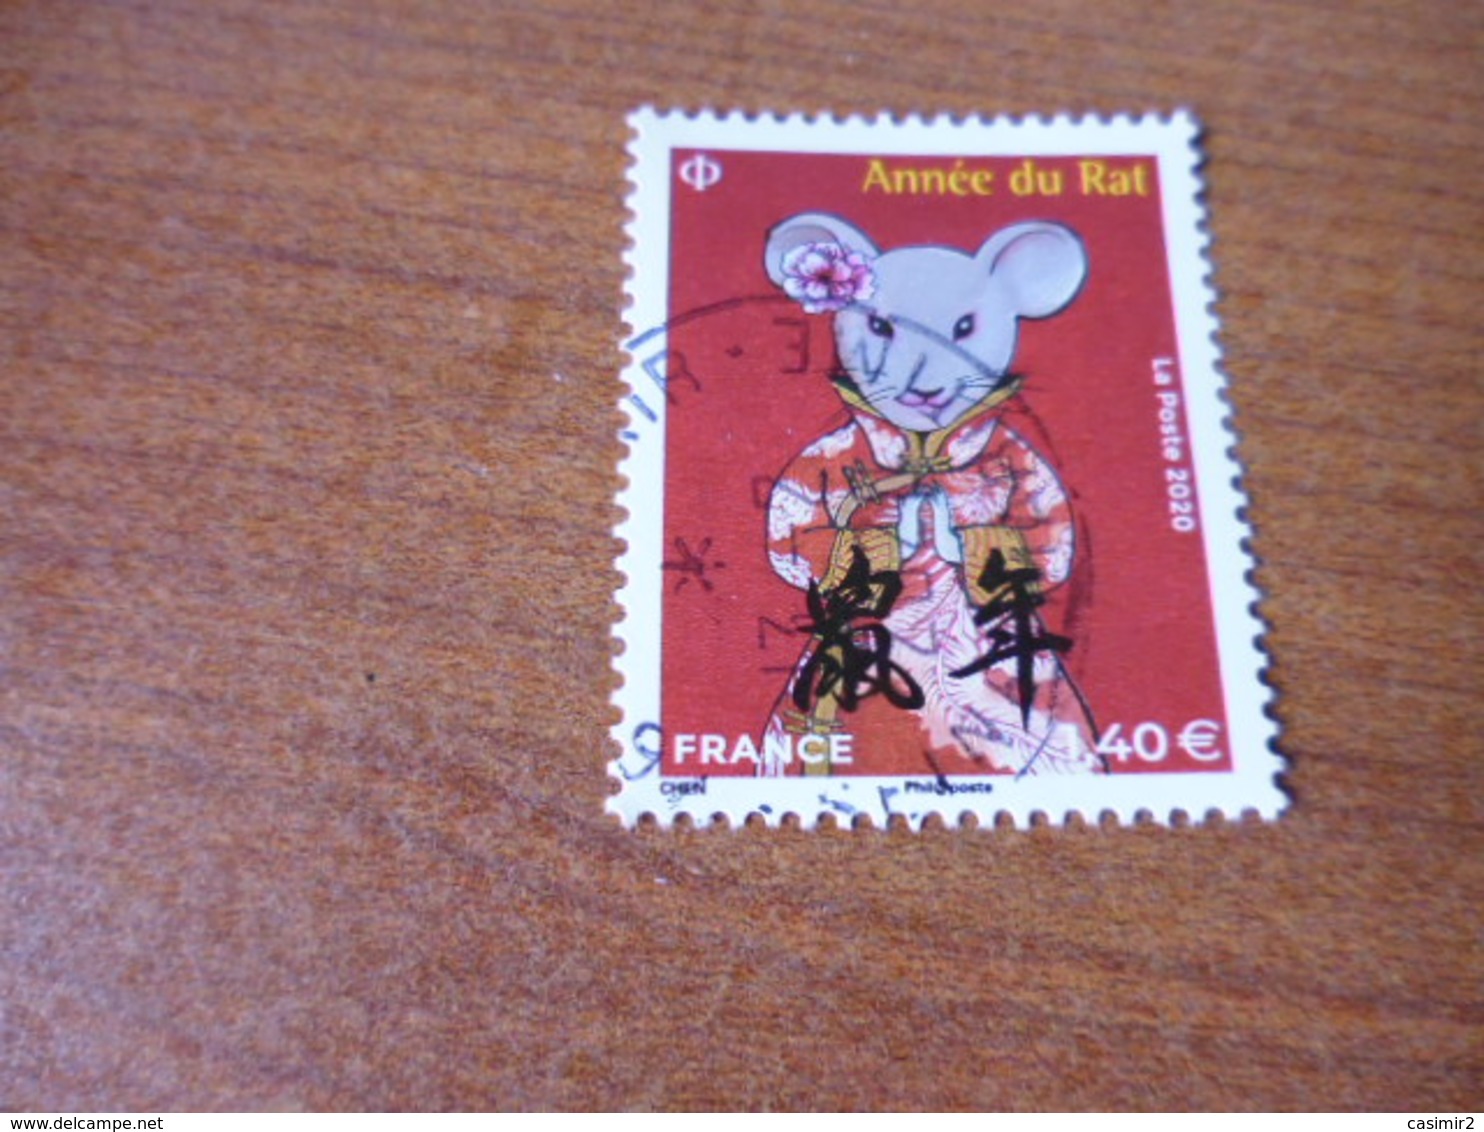 5378 OBLITERATION CHOISIE  SUR TIMBRE NEUF NOUVEL AN CHINOIS - Used Stamps